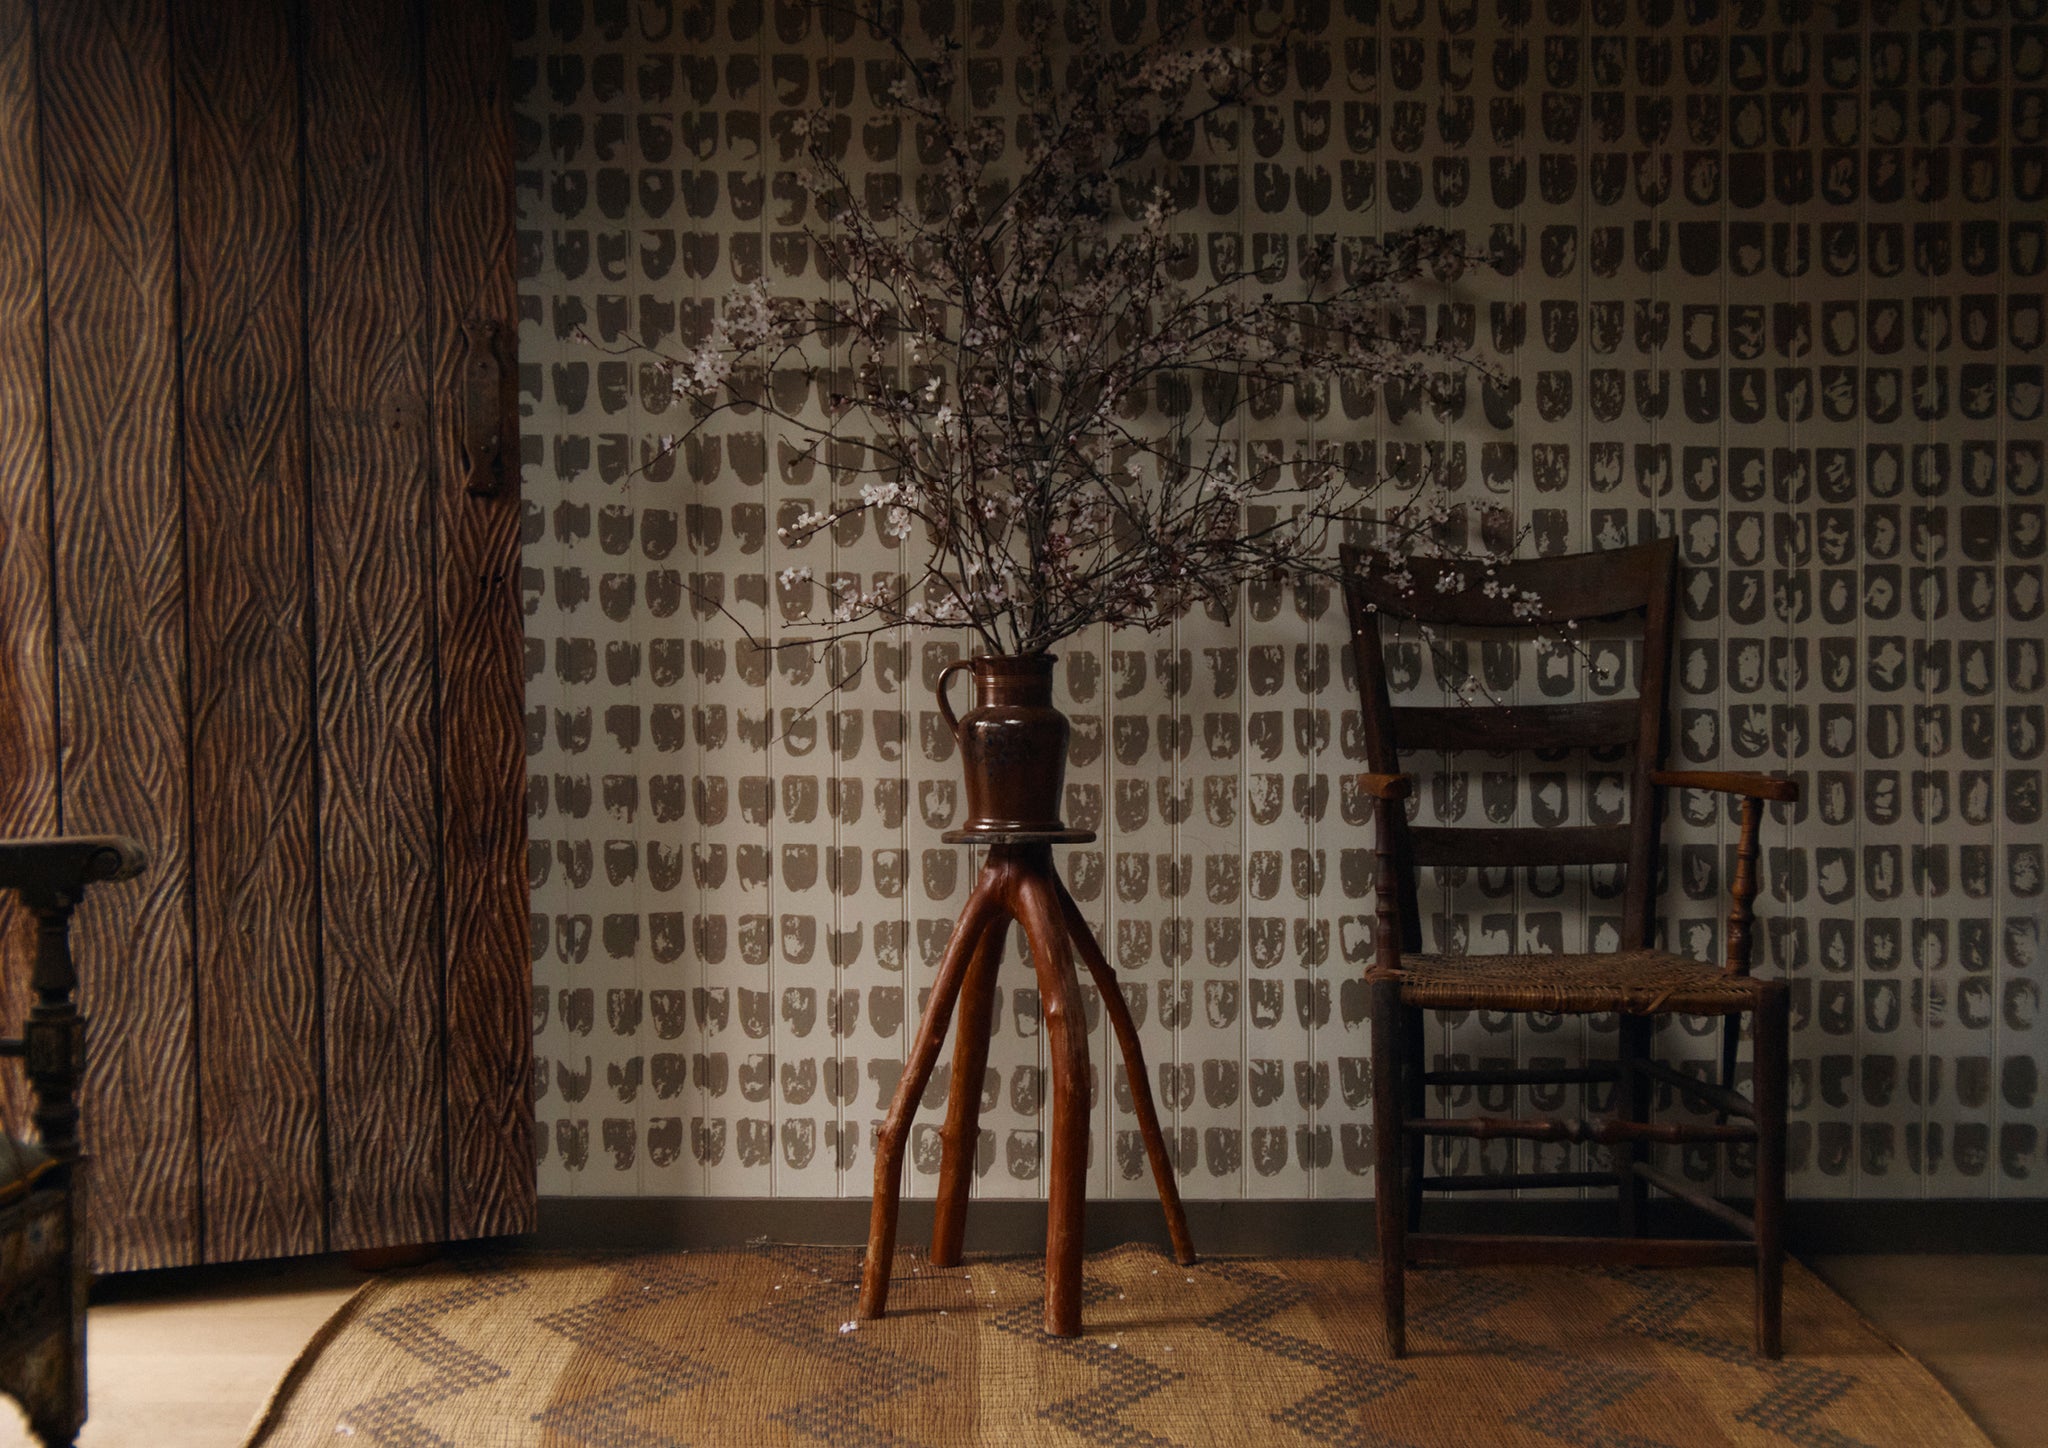 Patterned wallpaper and wooden furniture.